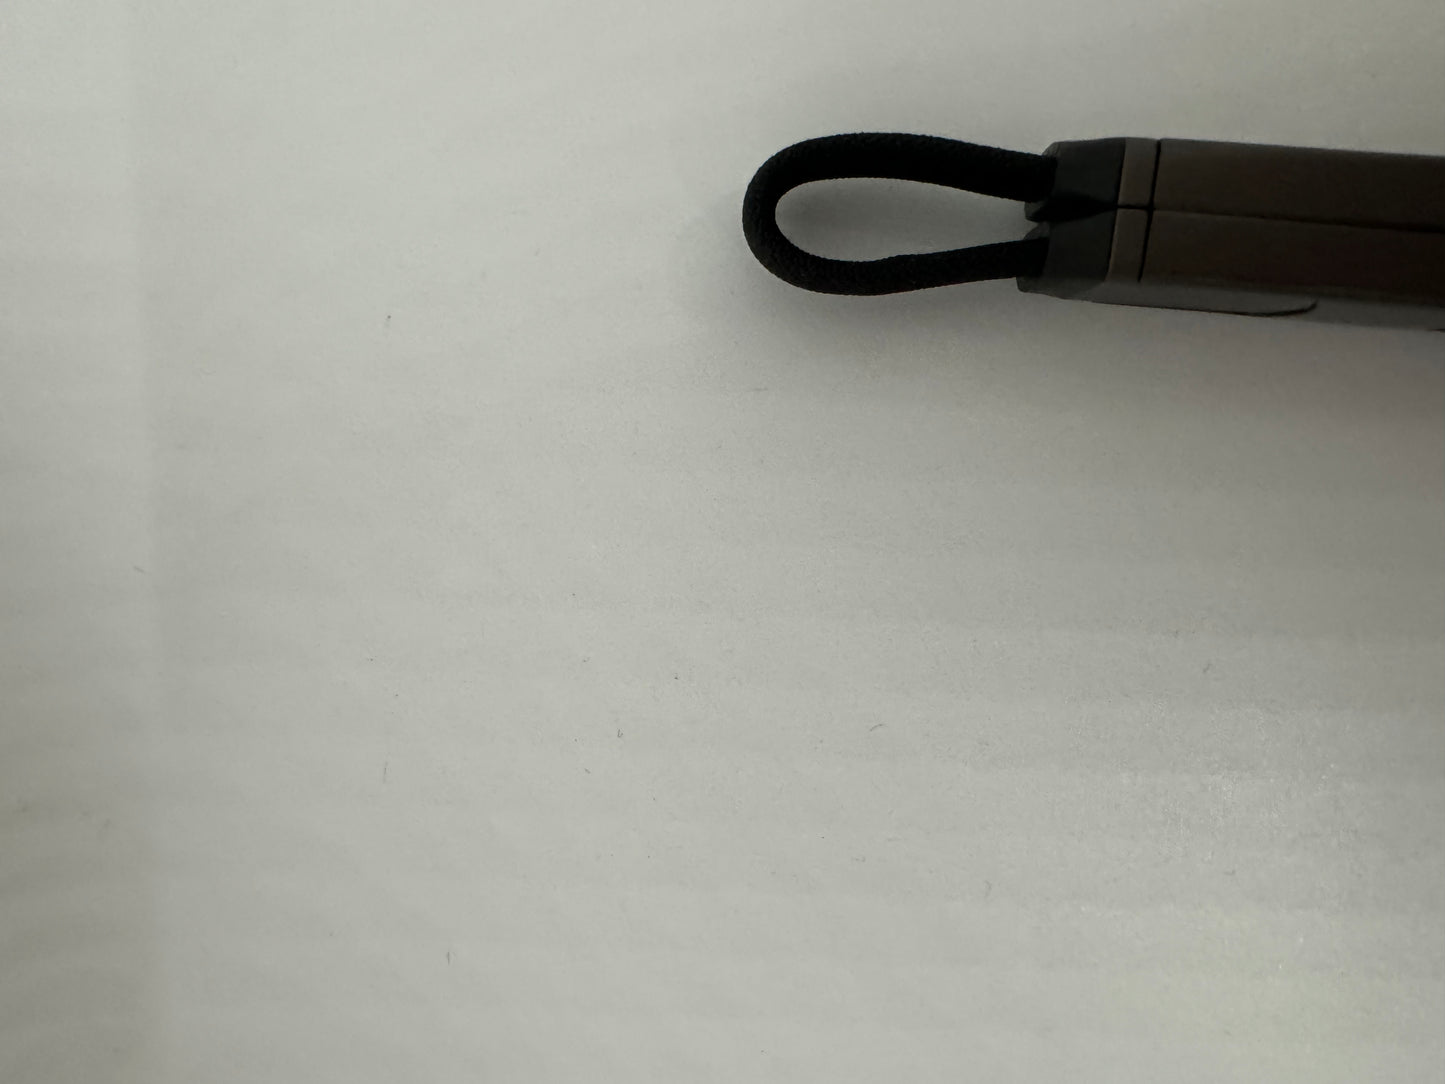 The picture shows a close-up of a white surface with a small object in the top right corner. The object appears to be a pen or a similar tool. It has a dark gray or black body with a looped fabric strap attached to its end. The strap is black and looks like it's made of a woven material. The pen or tool is lying horizontally, and the background is plain white with some shadows and texture.